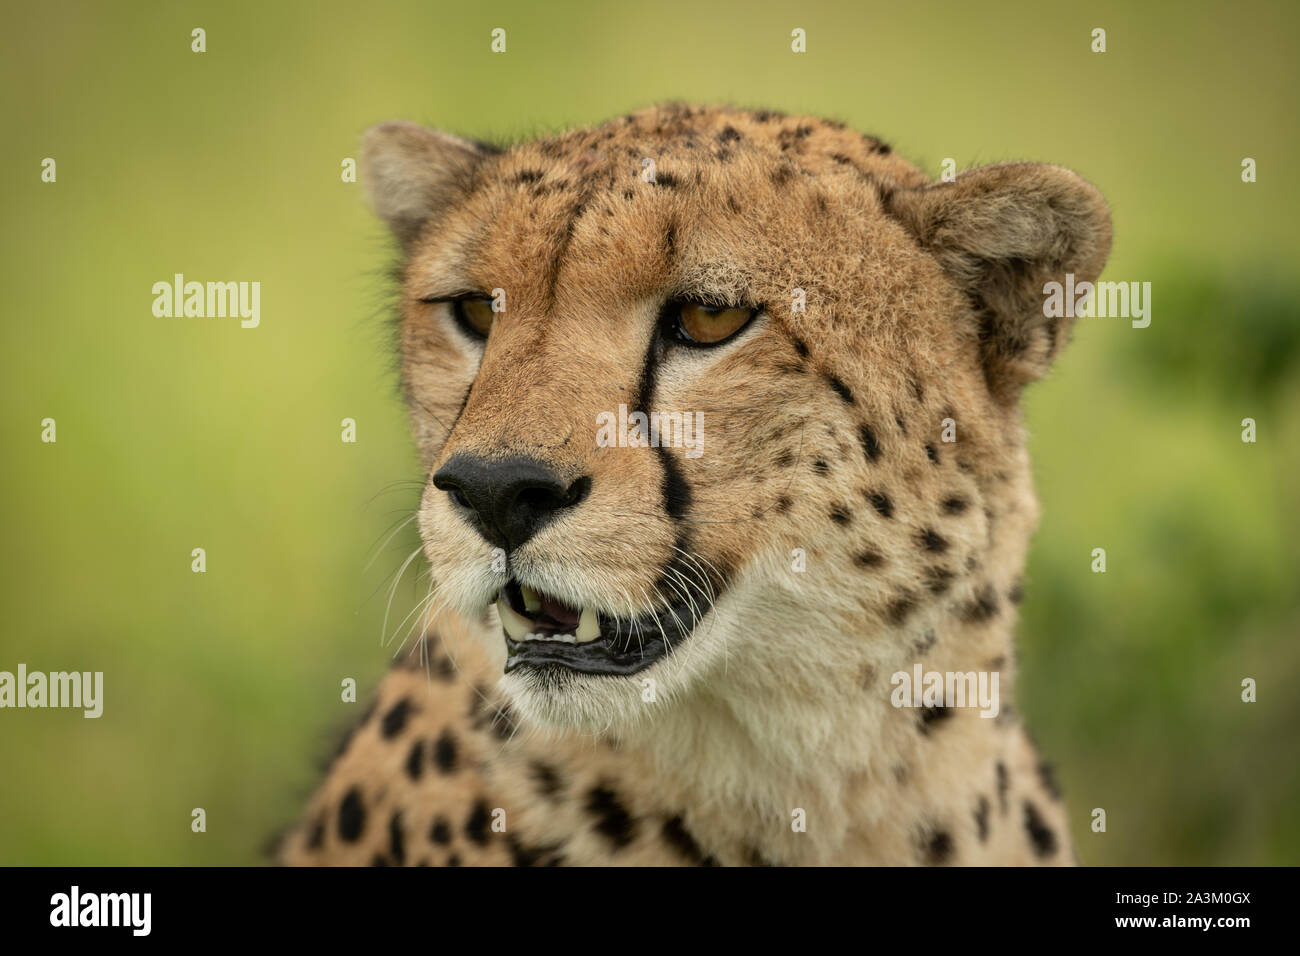 Close-up of cheetah face against green background Stock Photo - Alamy